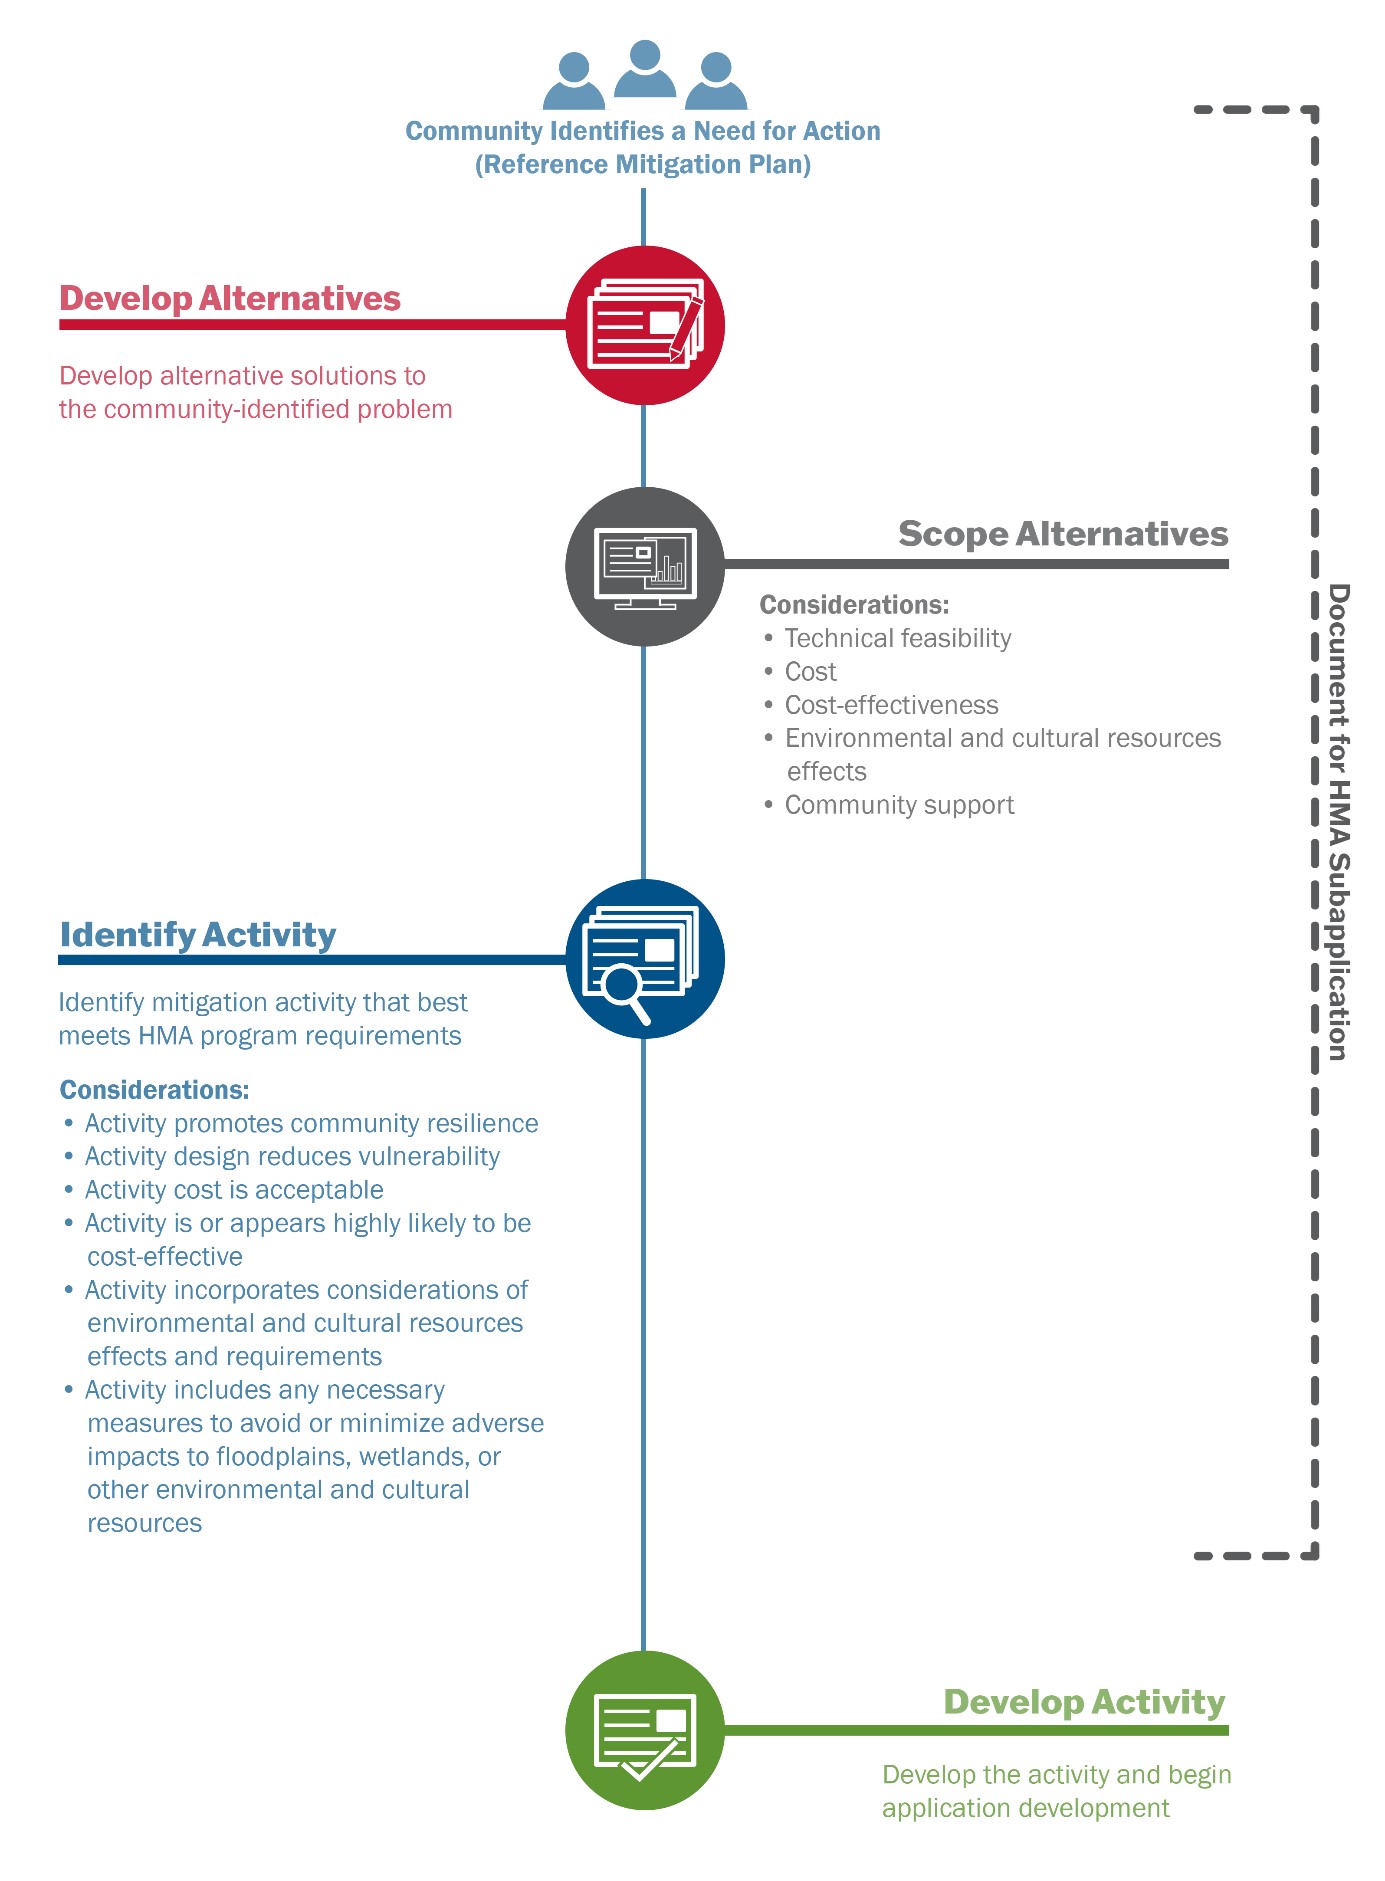 A graphic which describes the consideration during each step of the scoping process, which begins when a community identifies a need for action, then moves on to developing alternatives, scoping alternatives, identifying an activity, and ending when the activity is developed and application development begins.